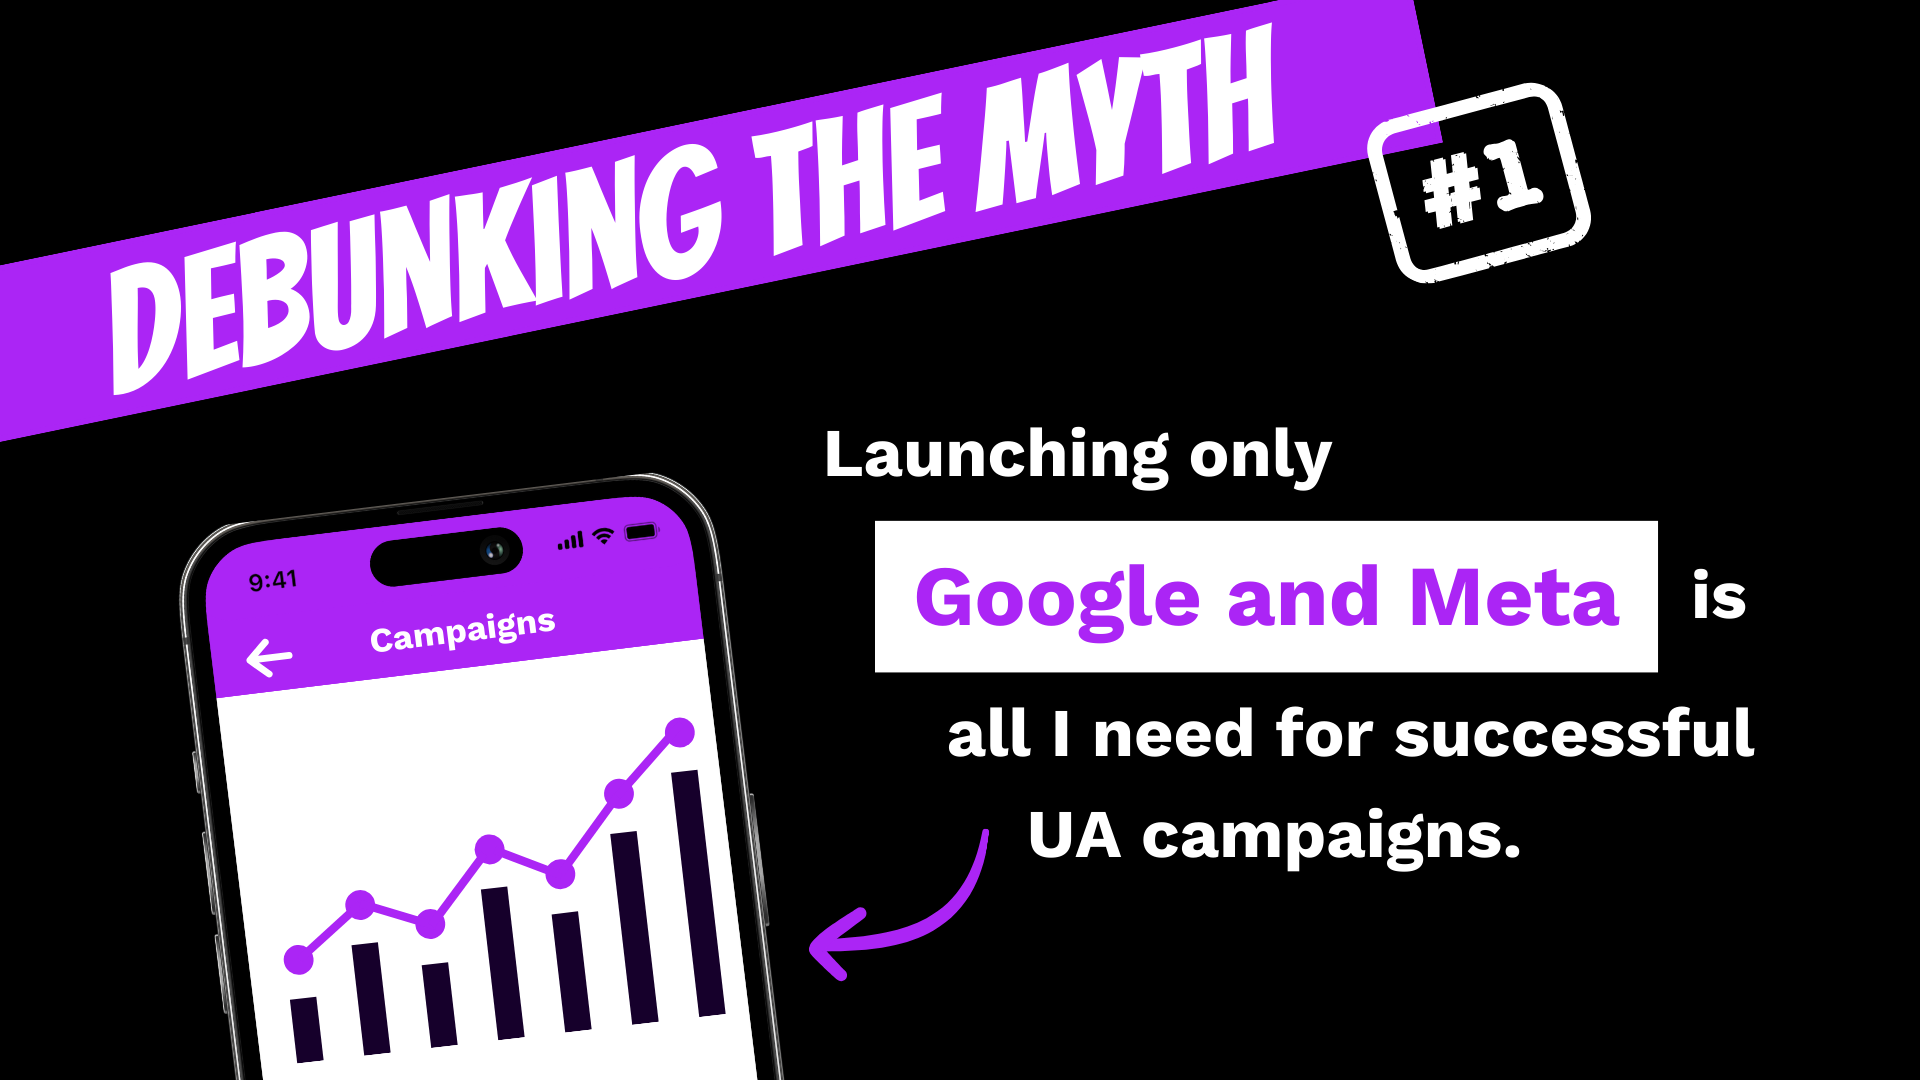 DTM #1: Launching only Google and Meta is all I need for successful UA campaigns.